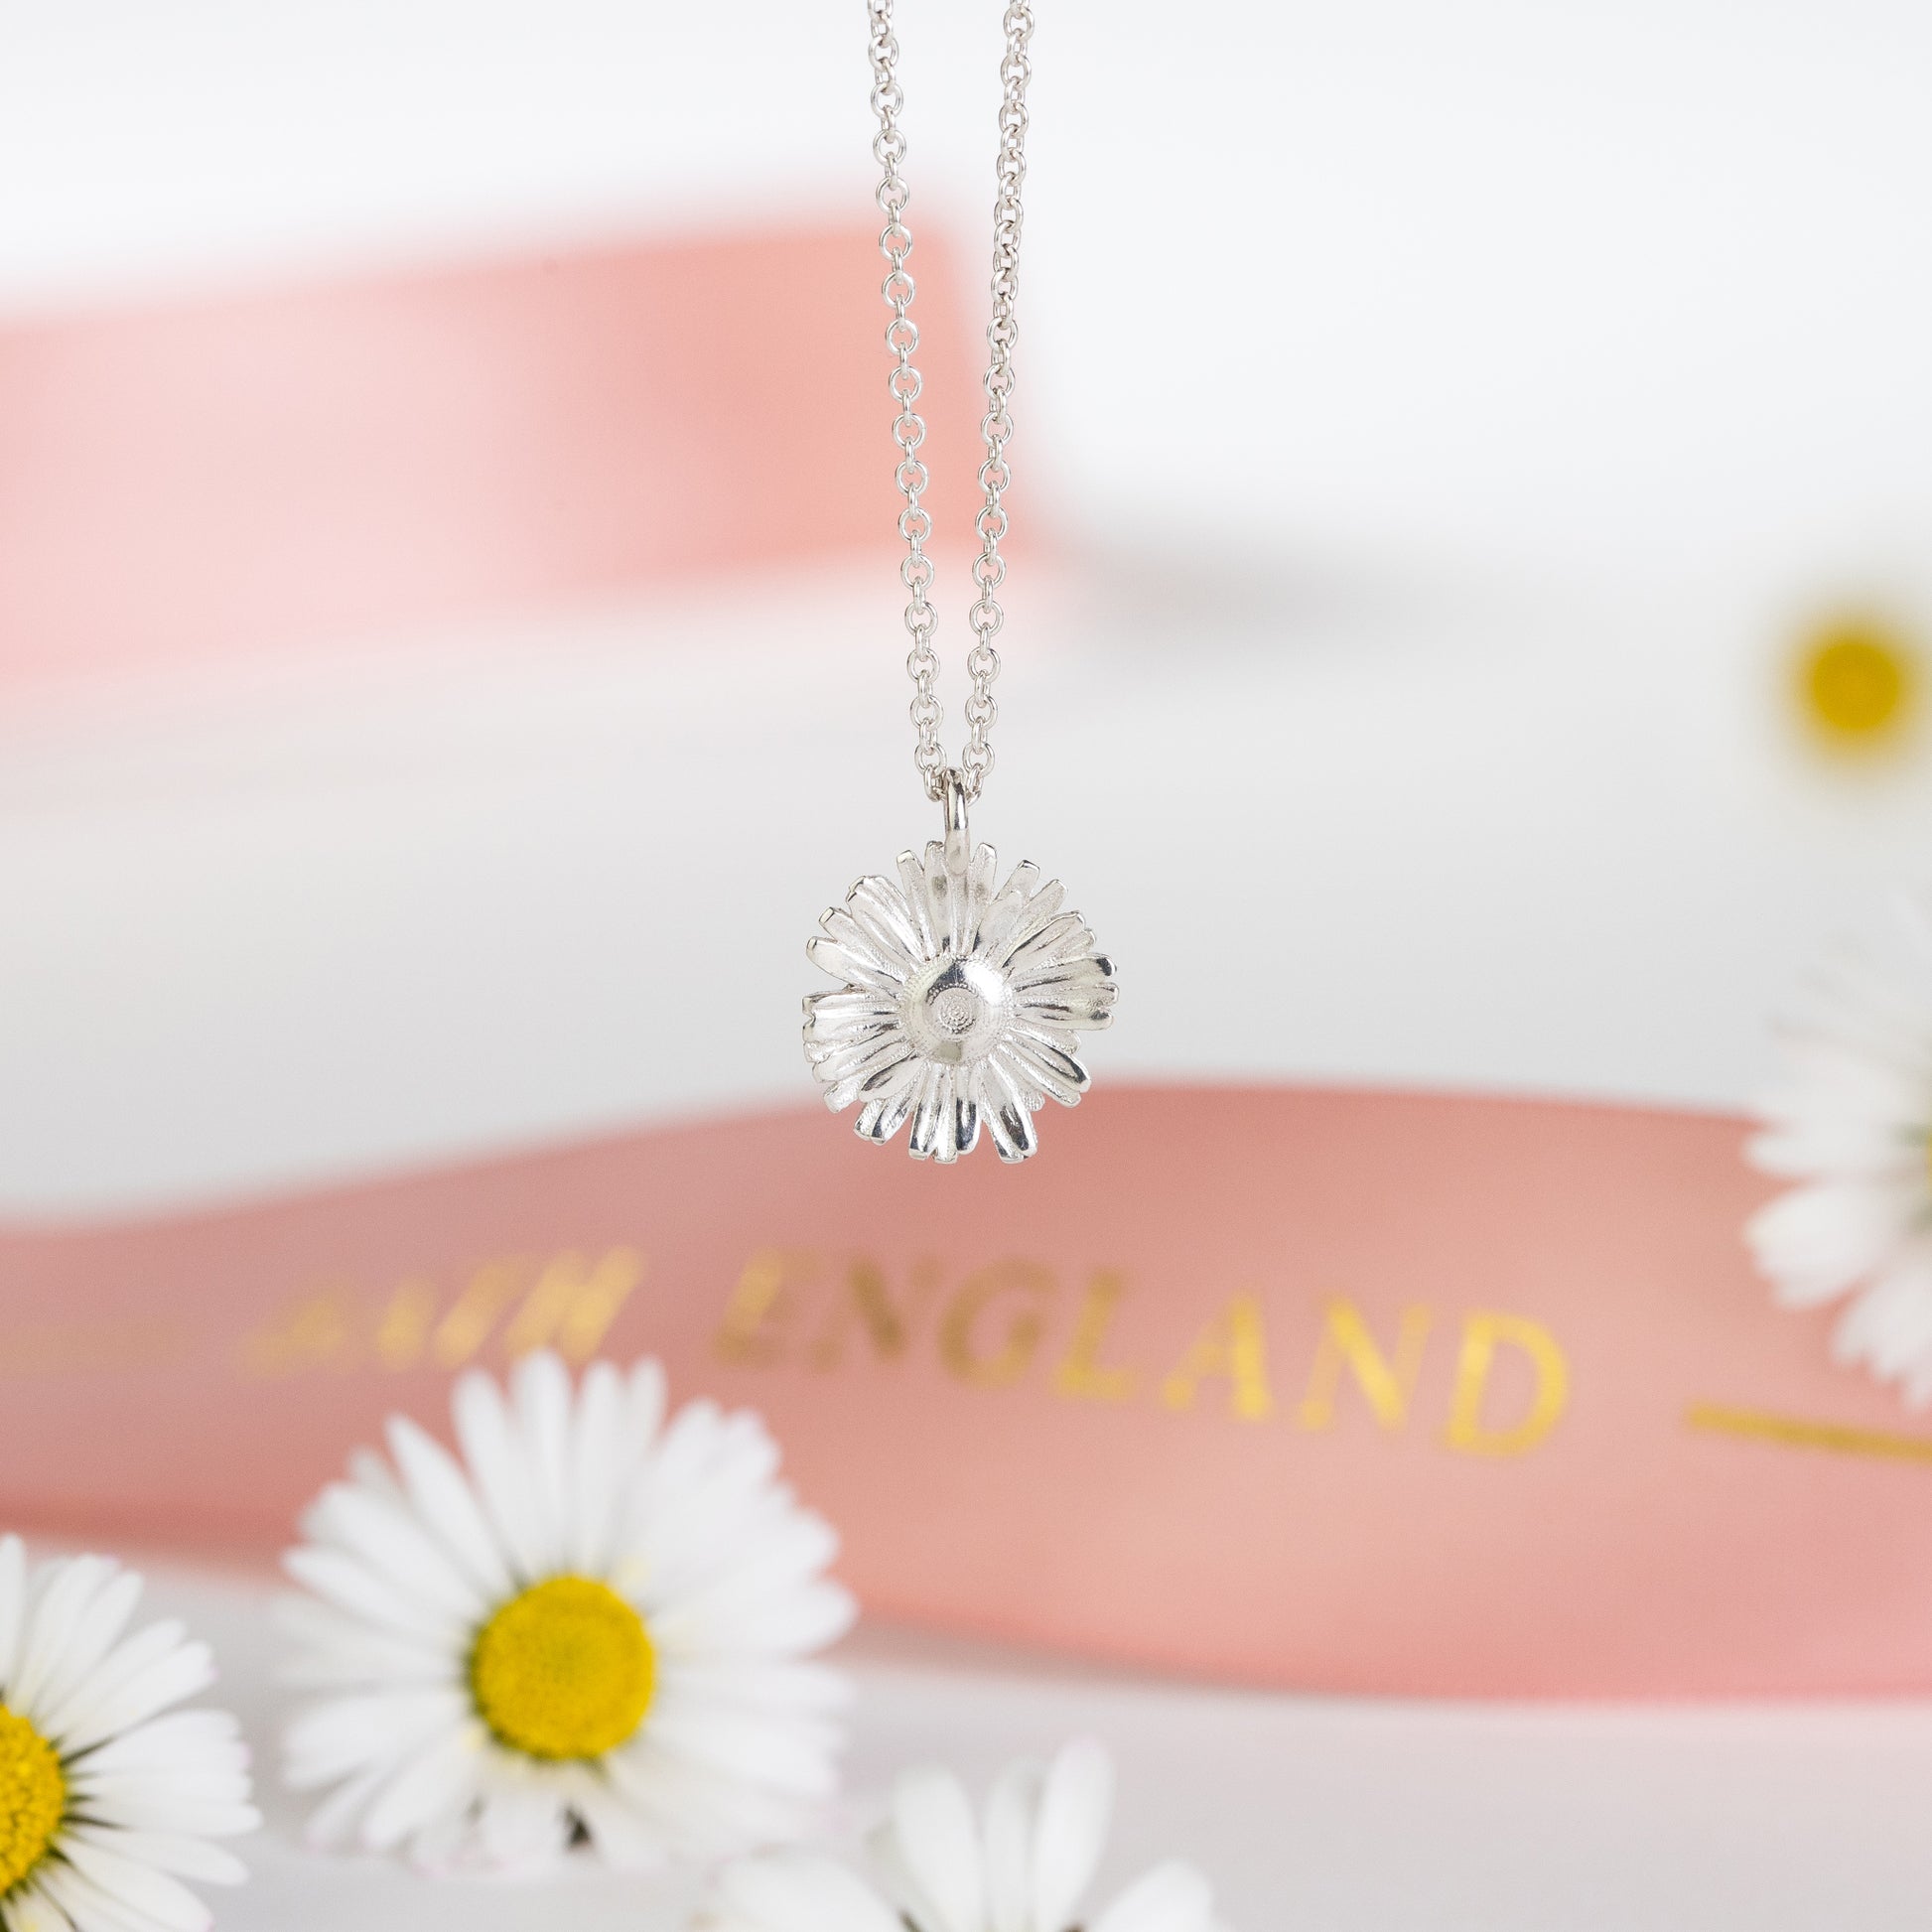 5th Anniversary Gift - Daisy Flower Necklace - Silver